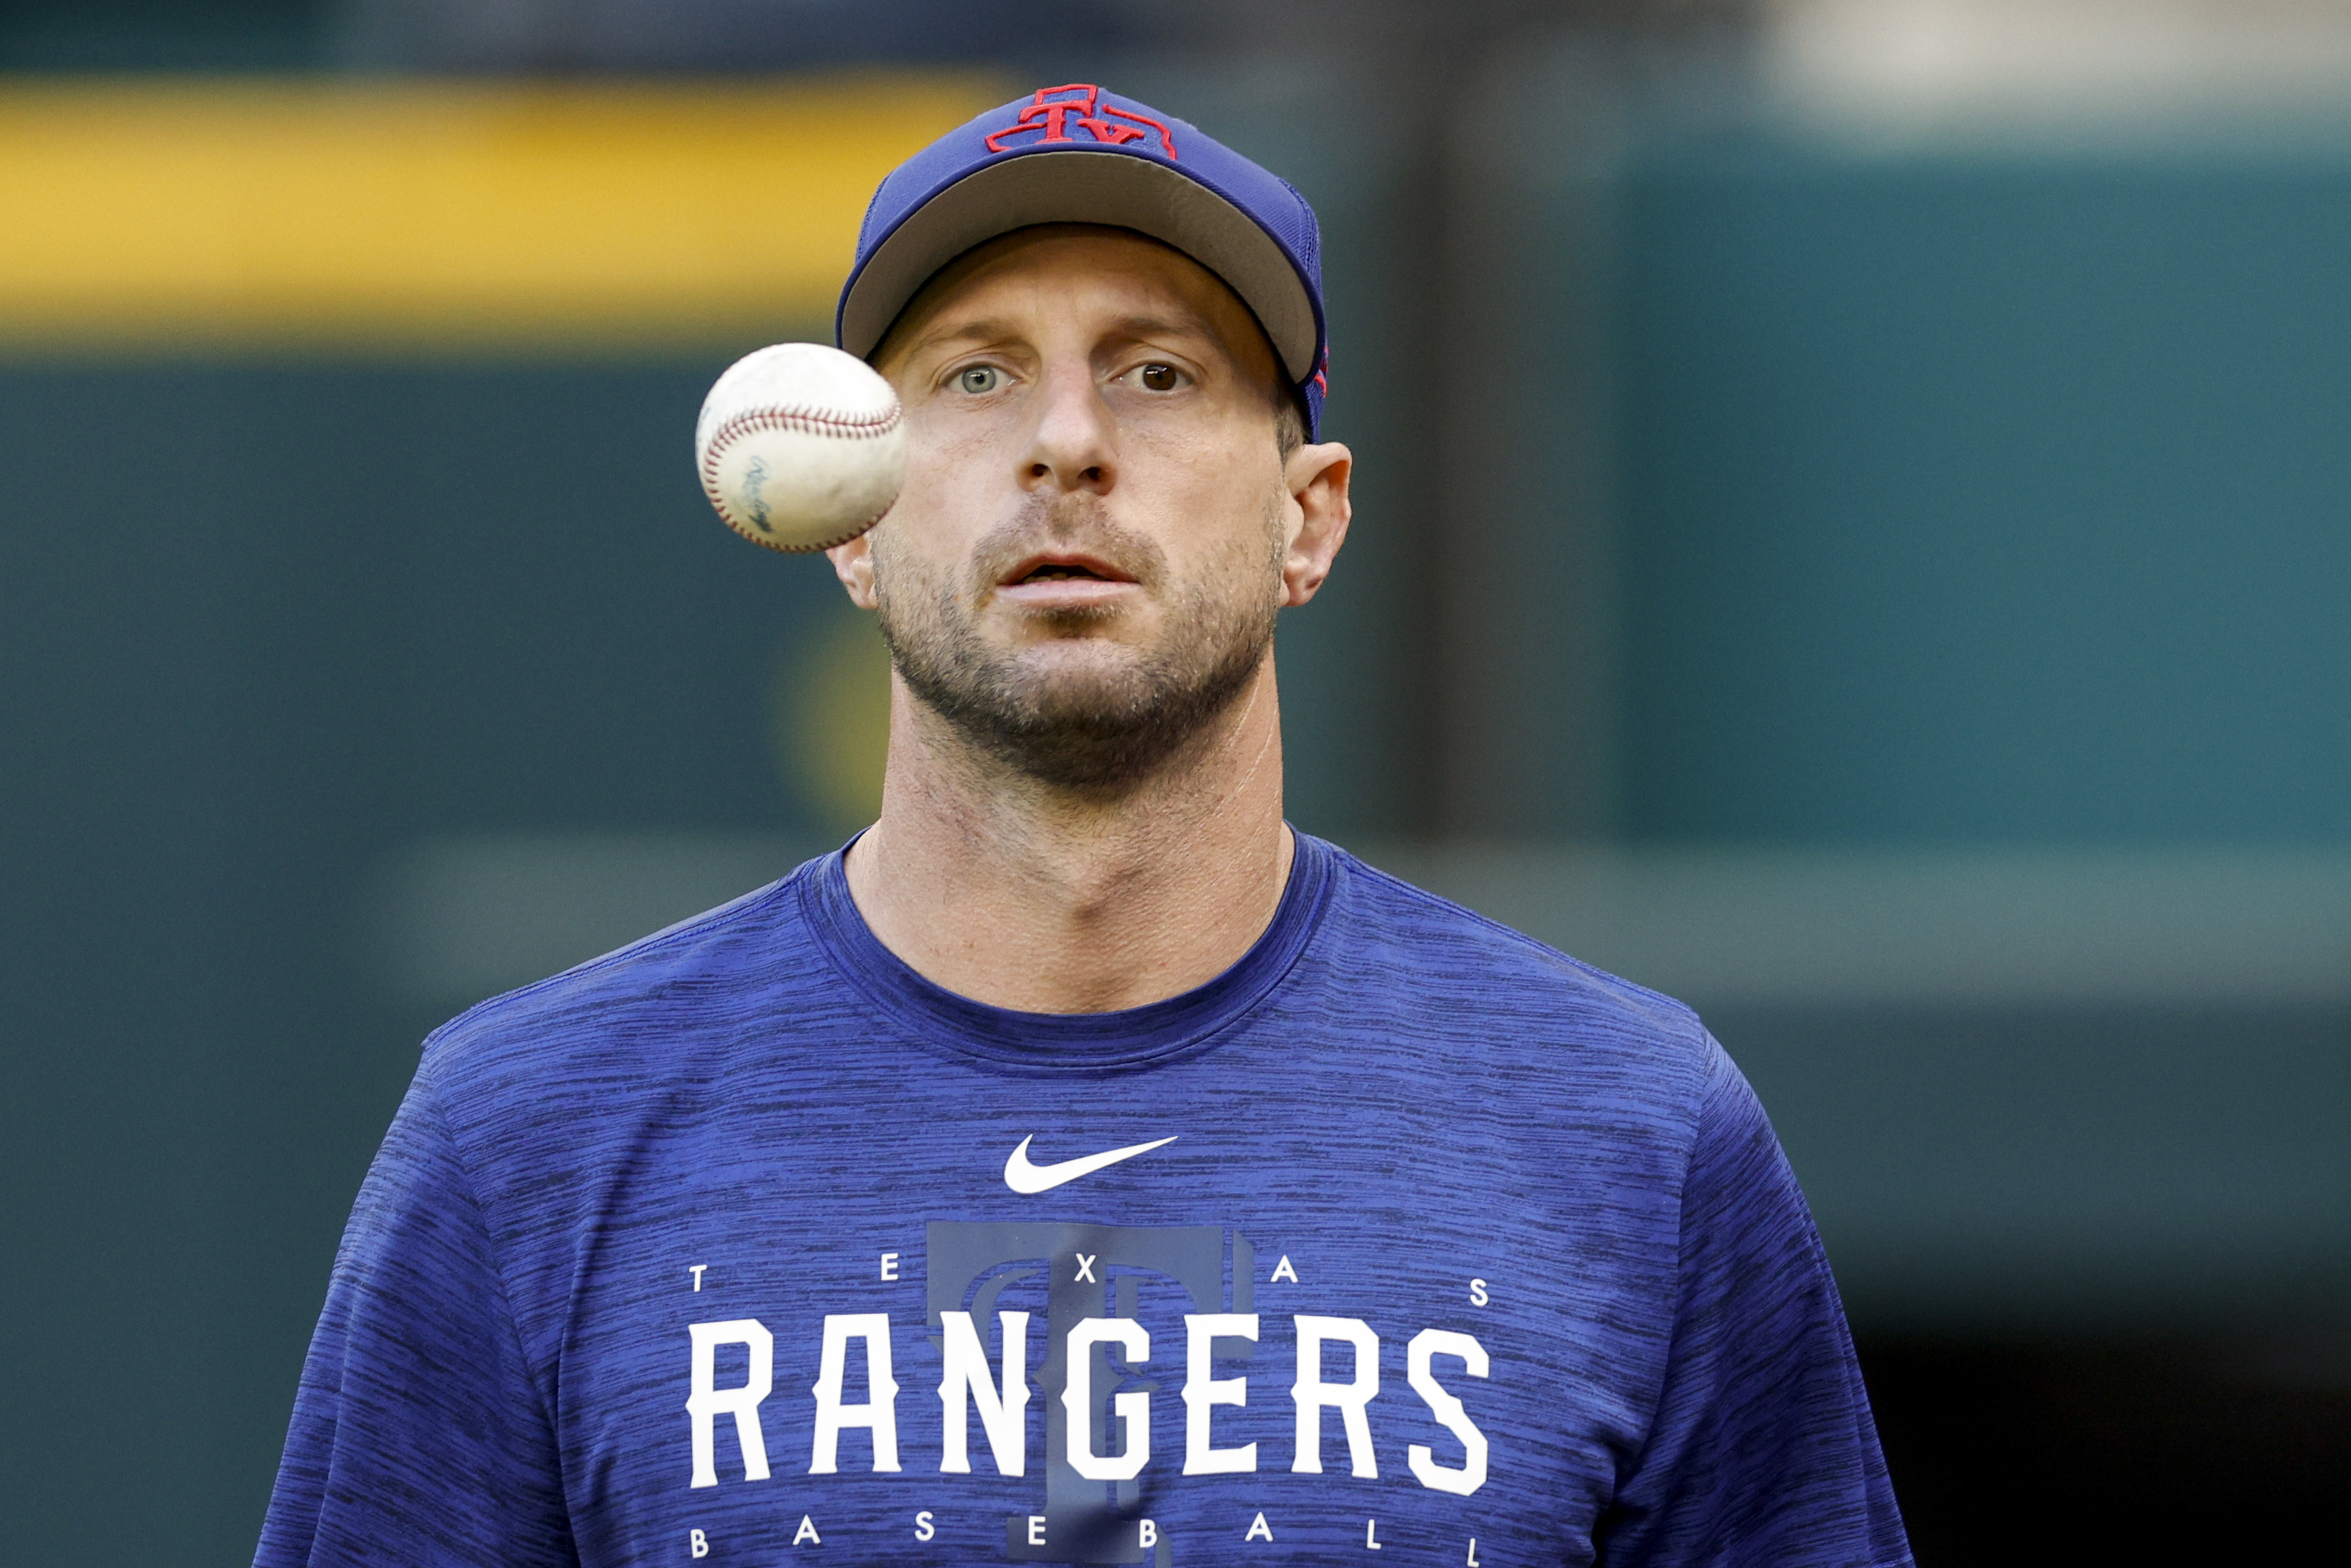 Simulated game has Mets' Max Scherzer ready for fans